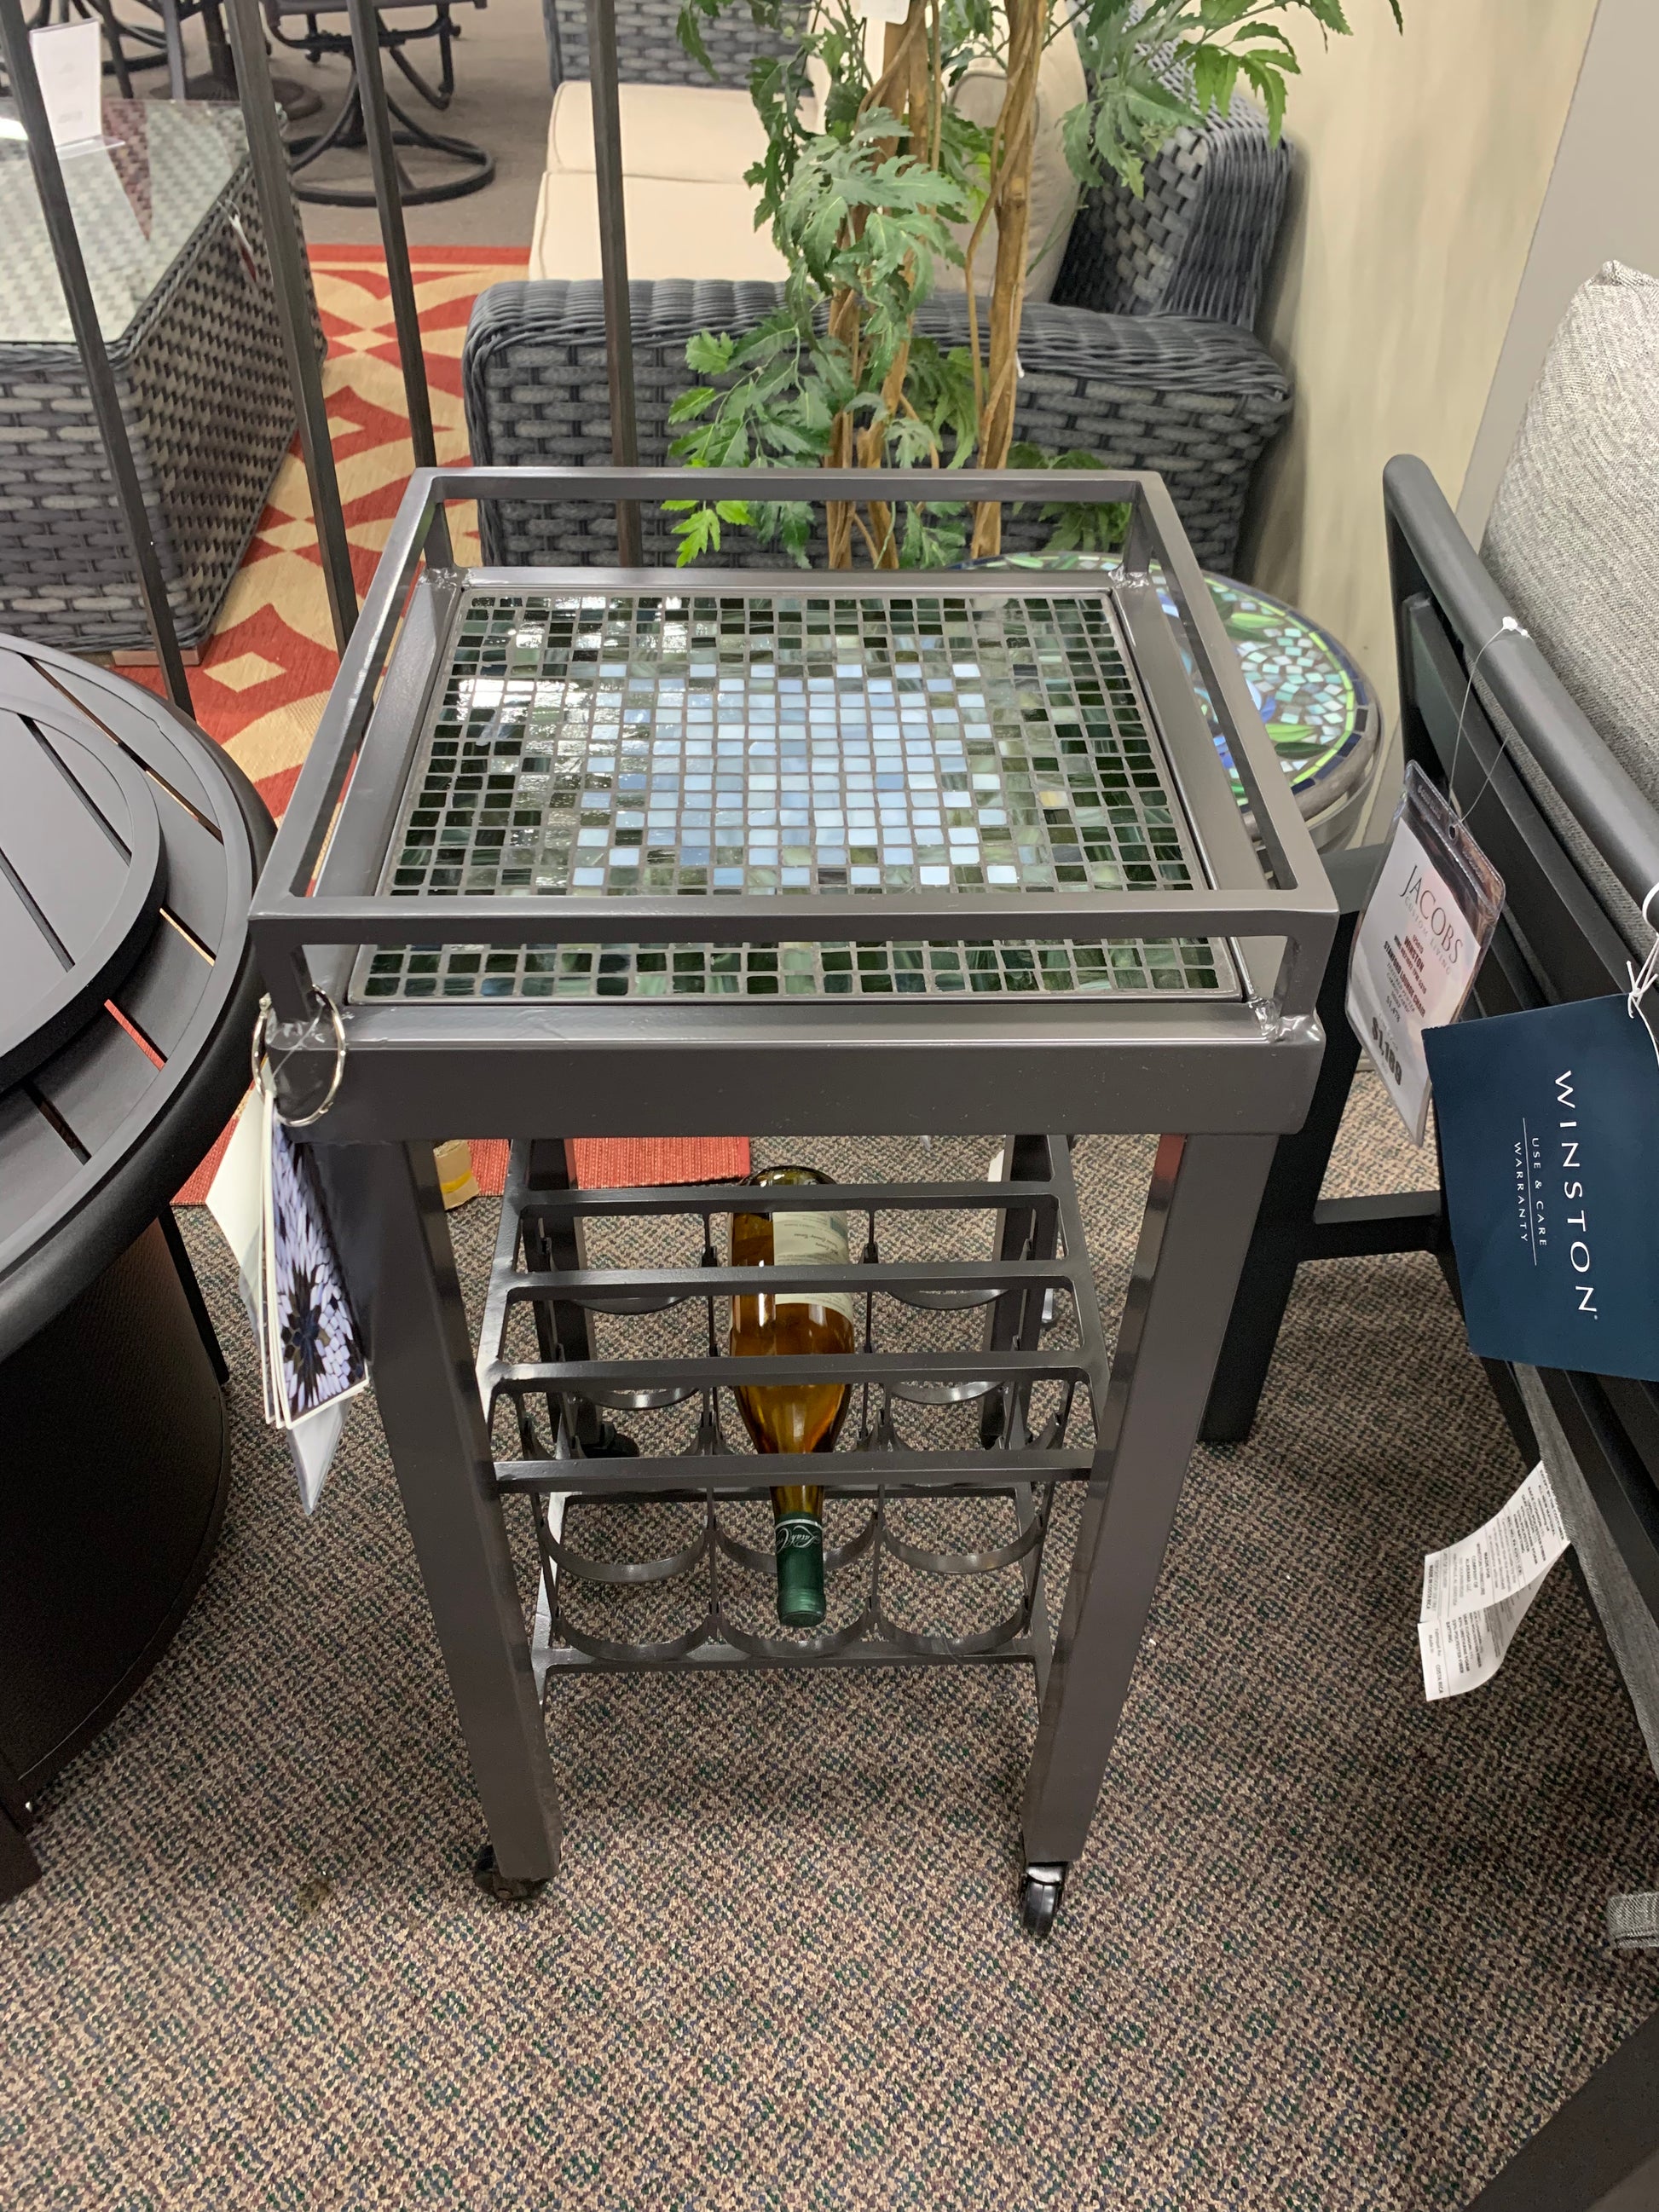 KNF Designs 14" Mosaic Top Wine Cart is available in our Jacobs Custom Living Spokane Valley showroom.